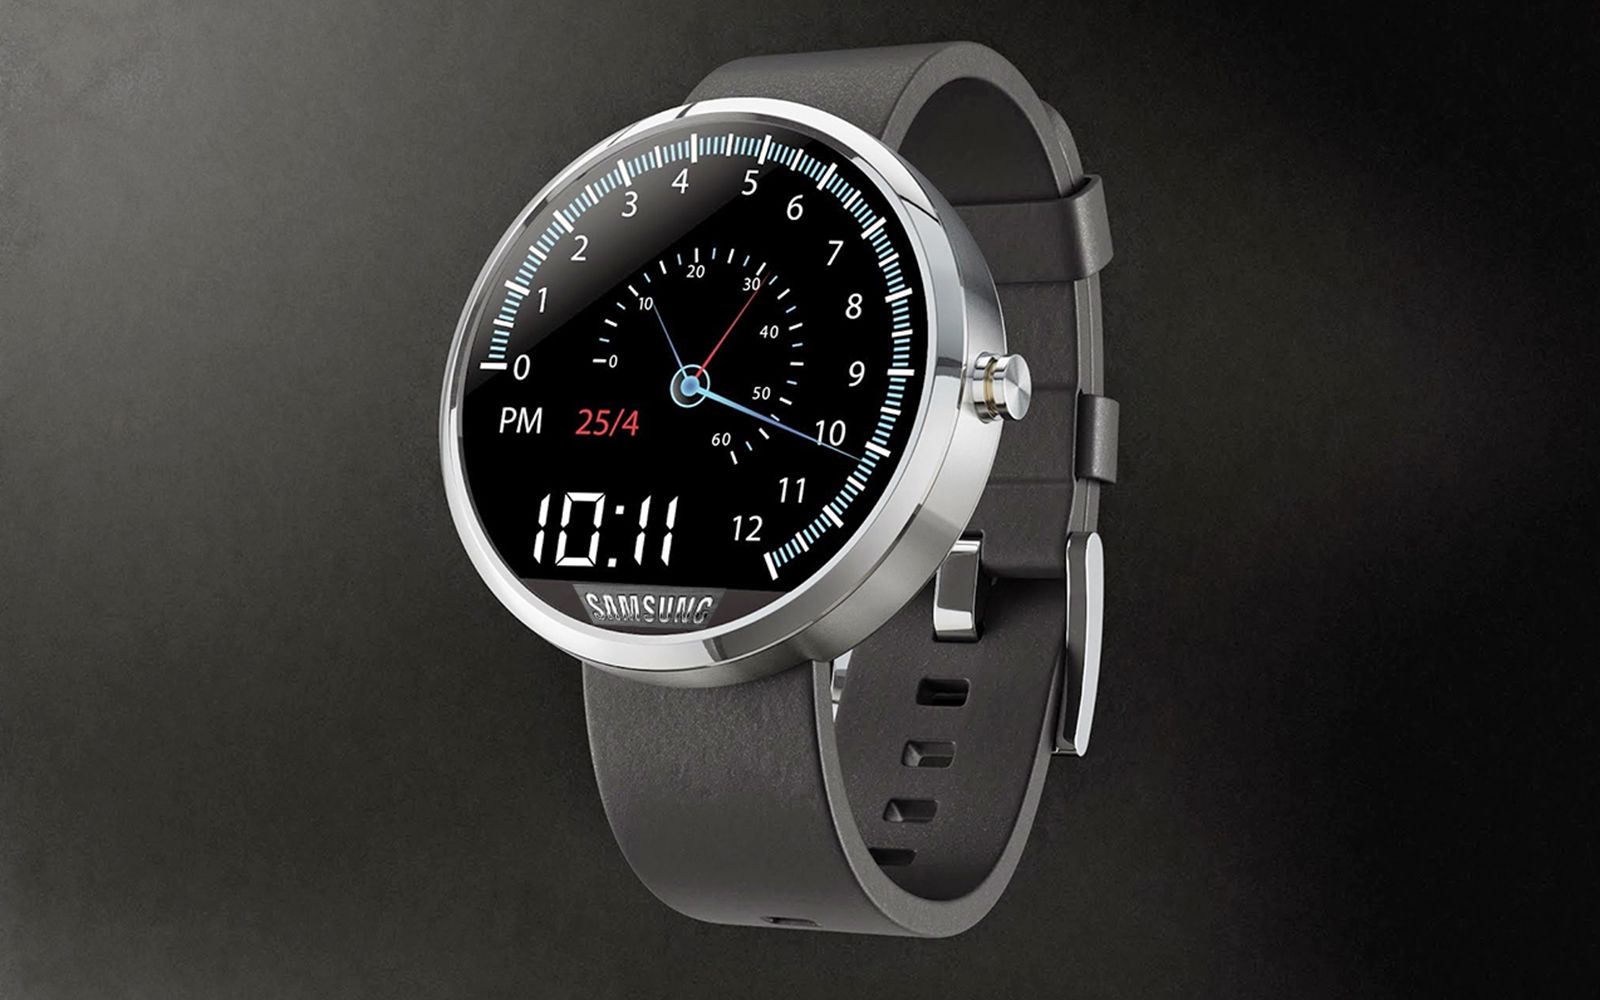 samsung gear a the company s first round smartwatch should offer 3g calling image 1